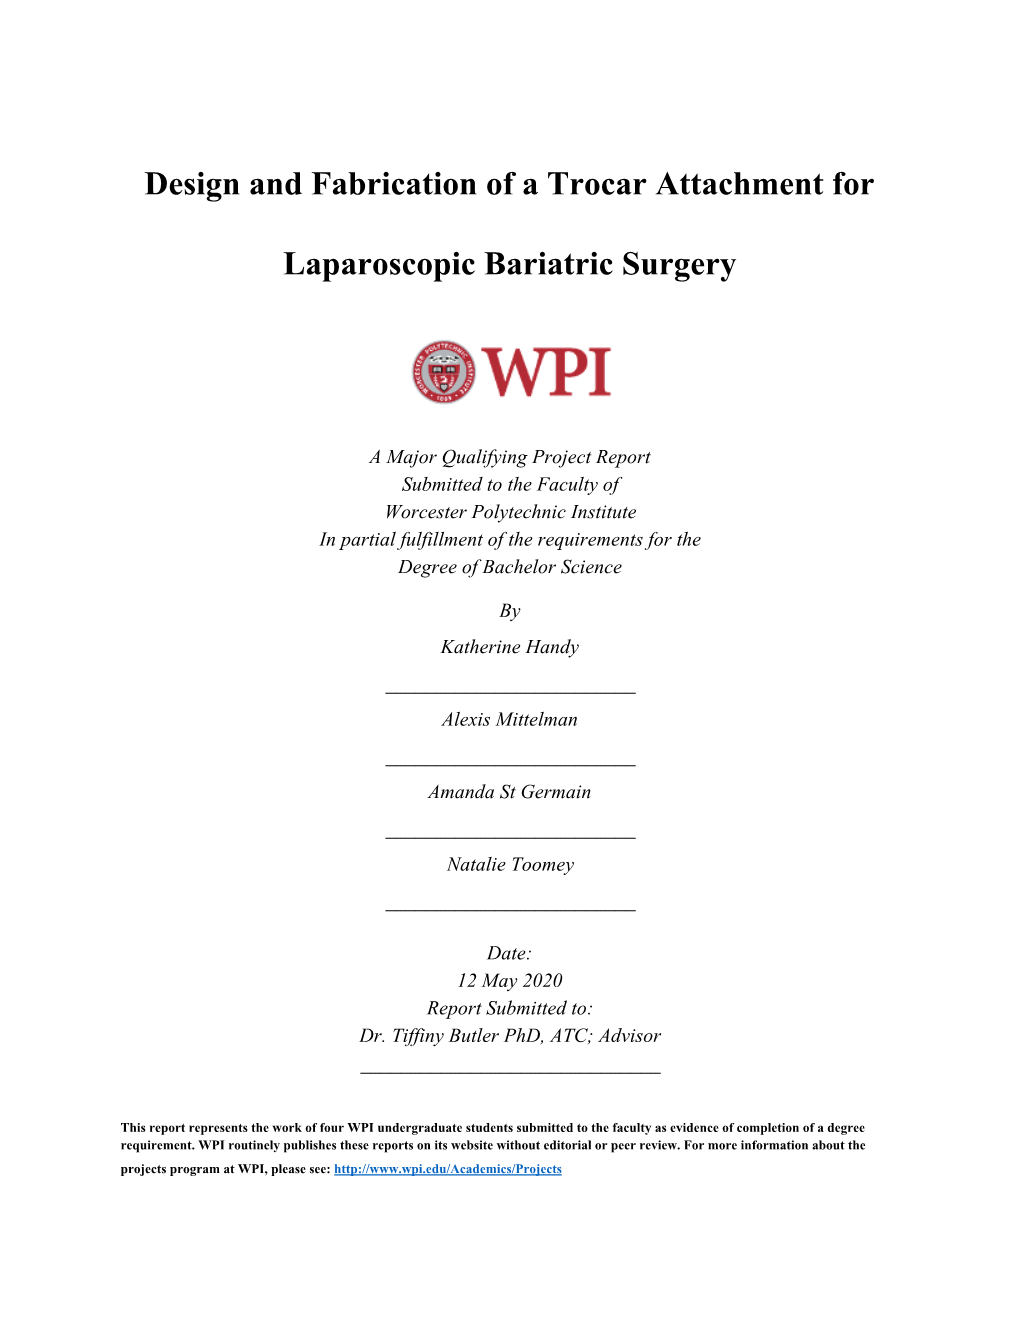 Design and Fabrication of a Trocar Attachment for Laparoscopic Bariatric Surgery